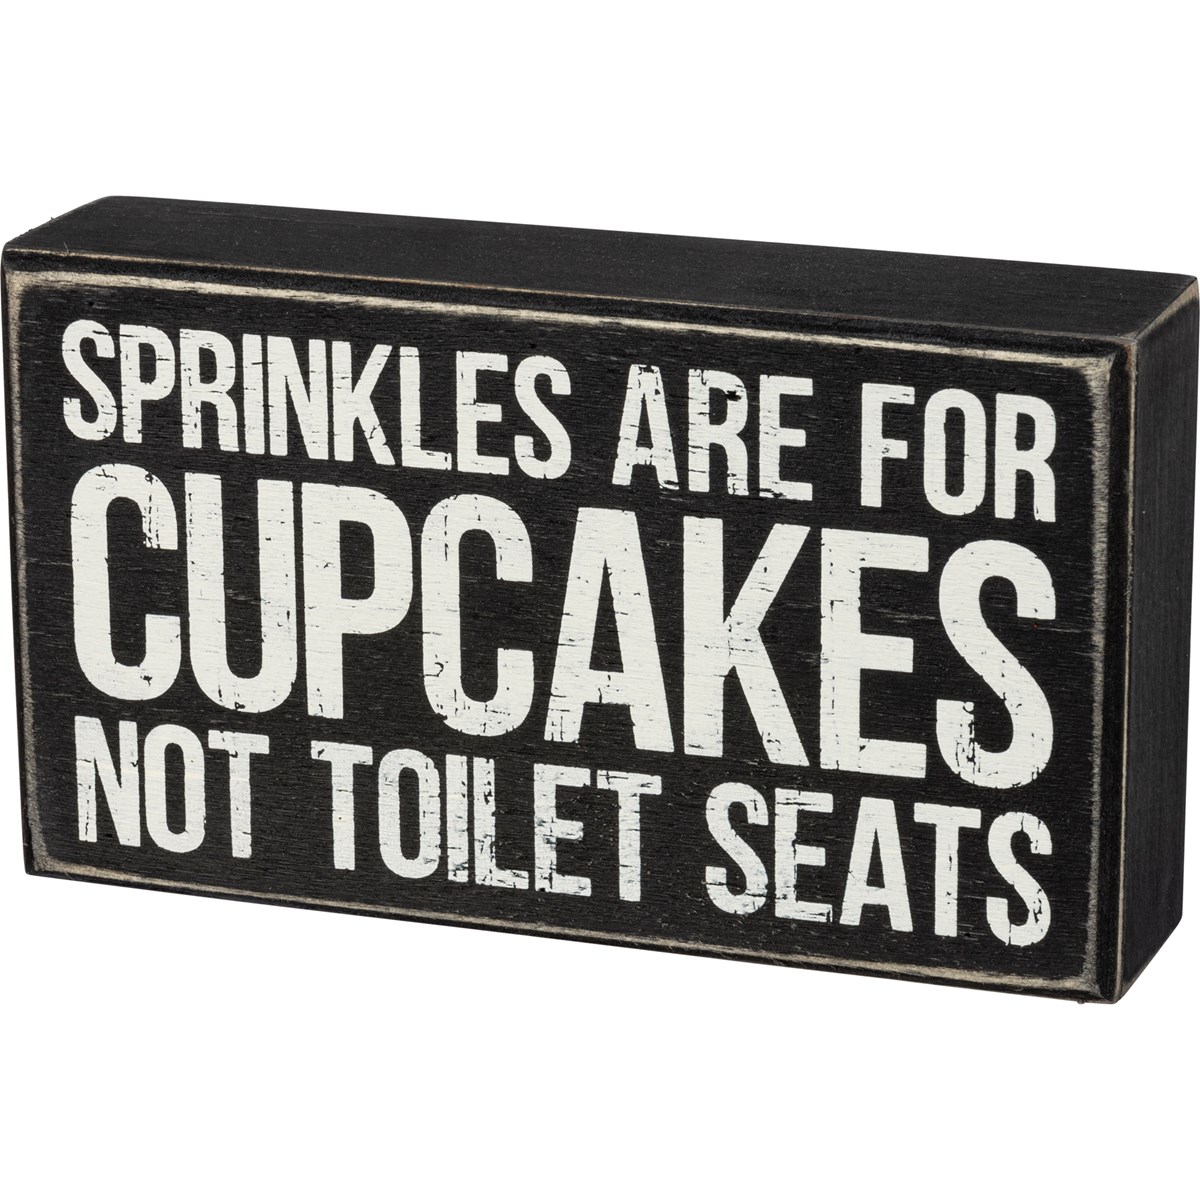 Sprinkles Are For Cupcakes Box Sign - Wood